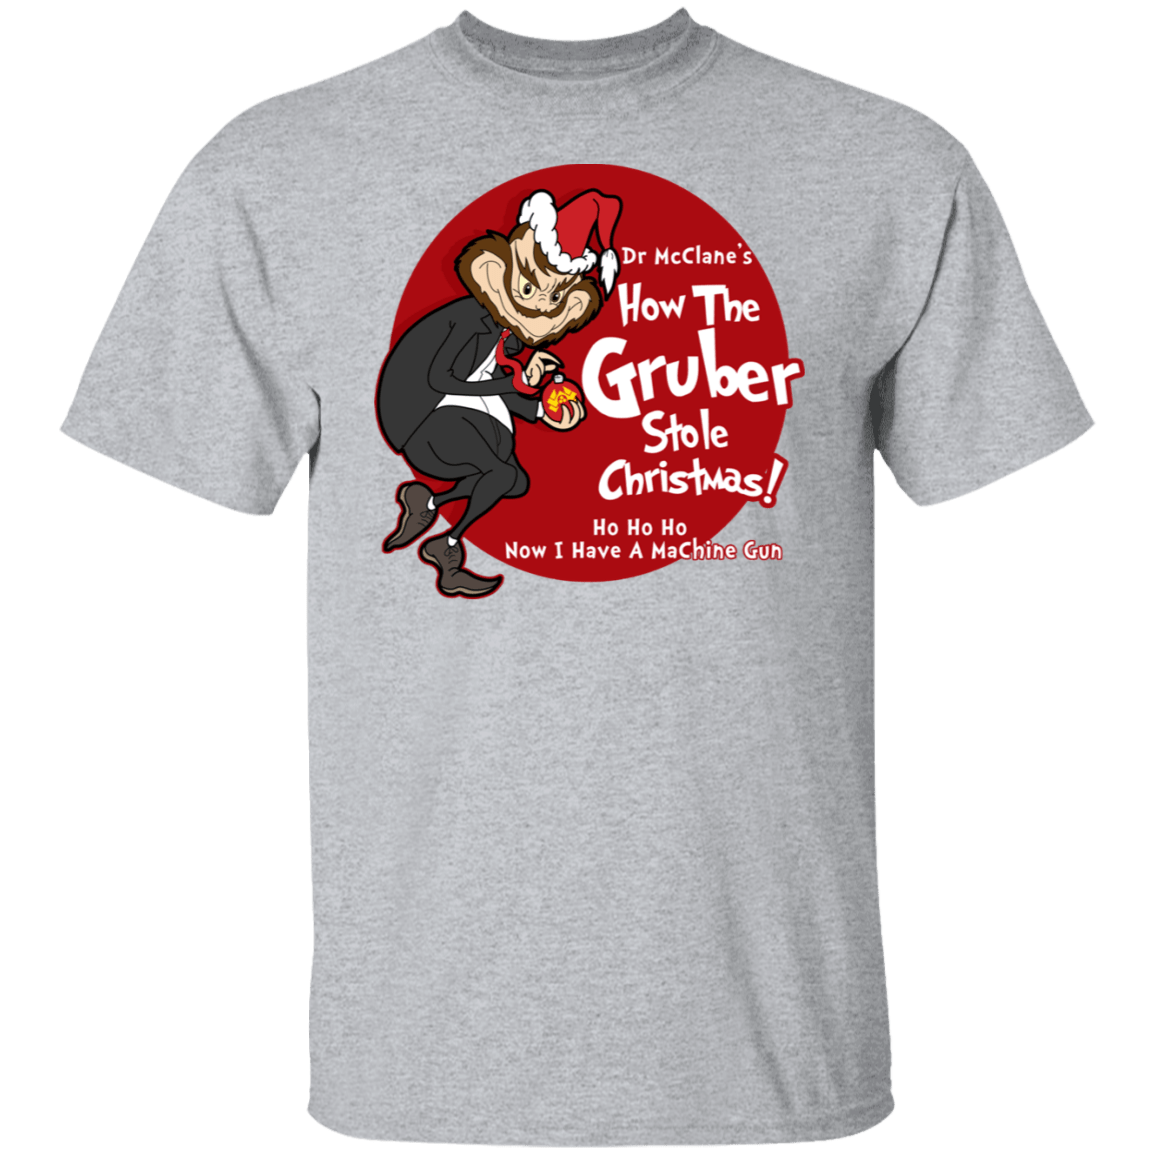 T-Shirts Sport Grey / S How the Gruber Stole Christmas T-Shirt